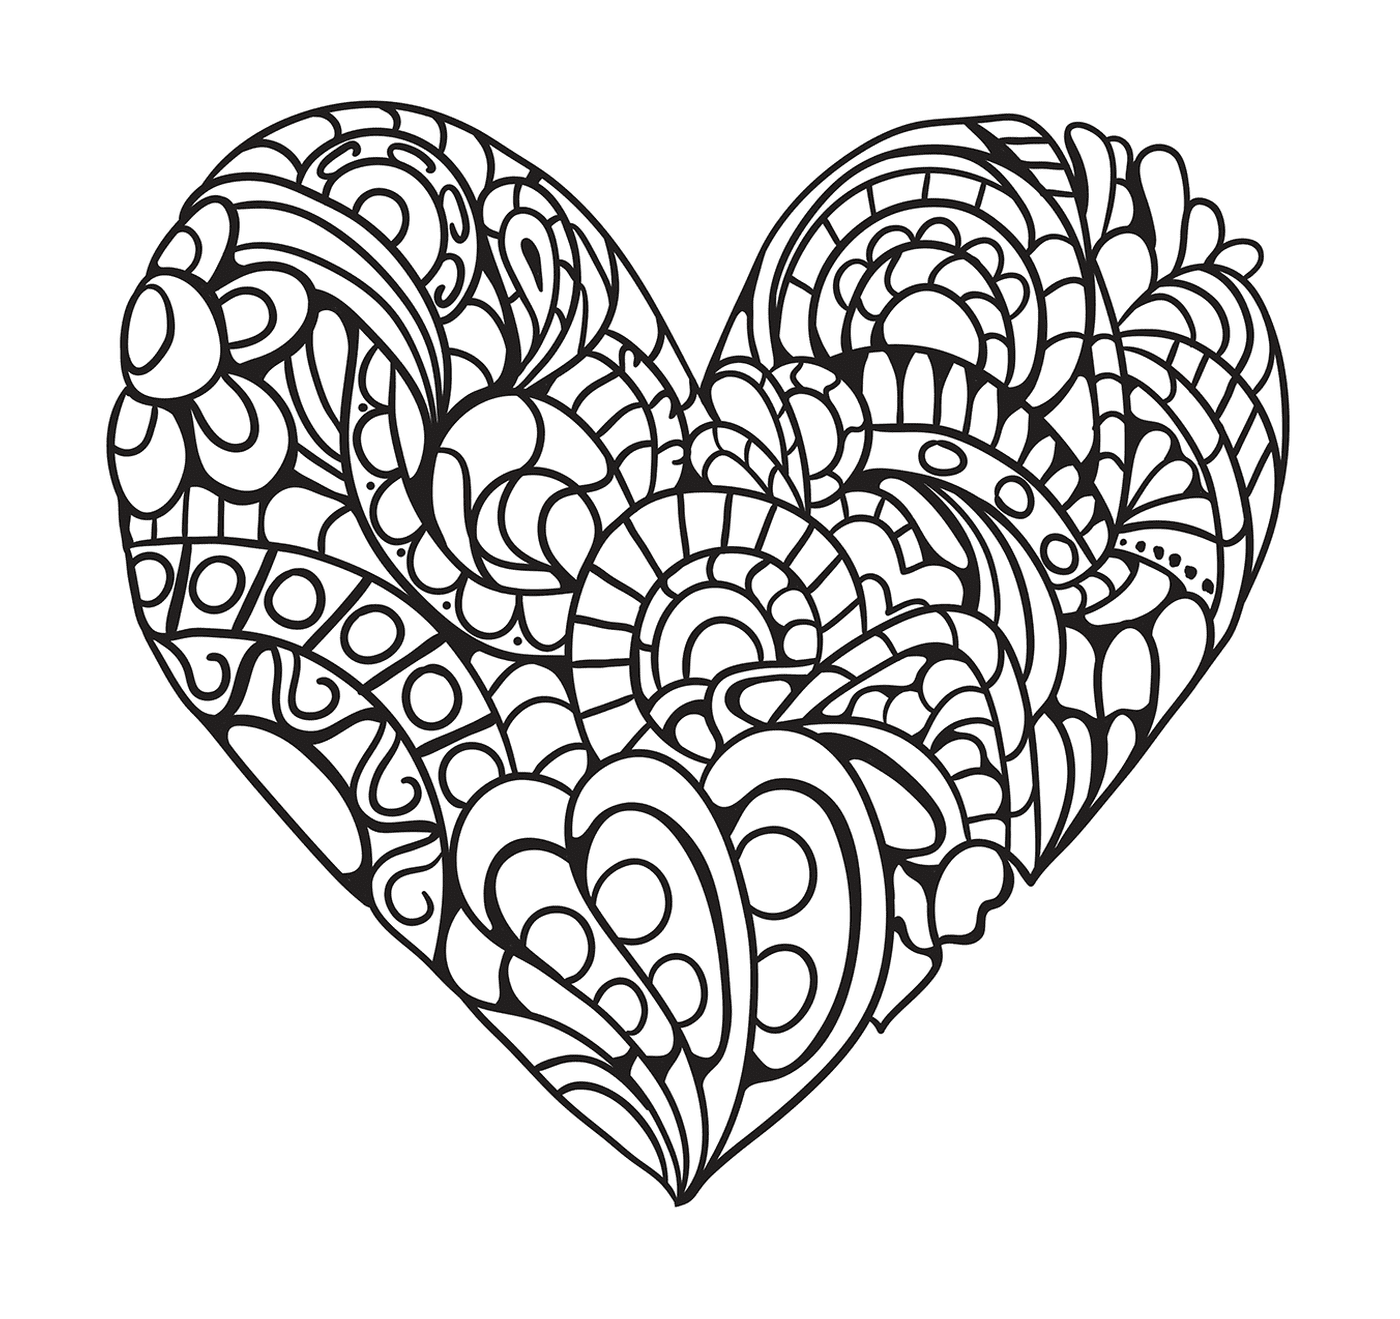  Zentangle heart for adult relaxation 